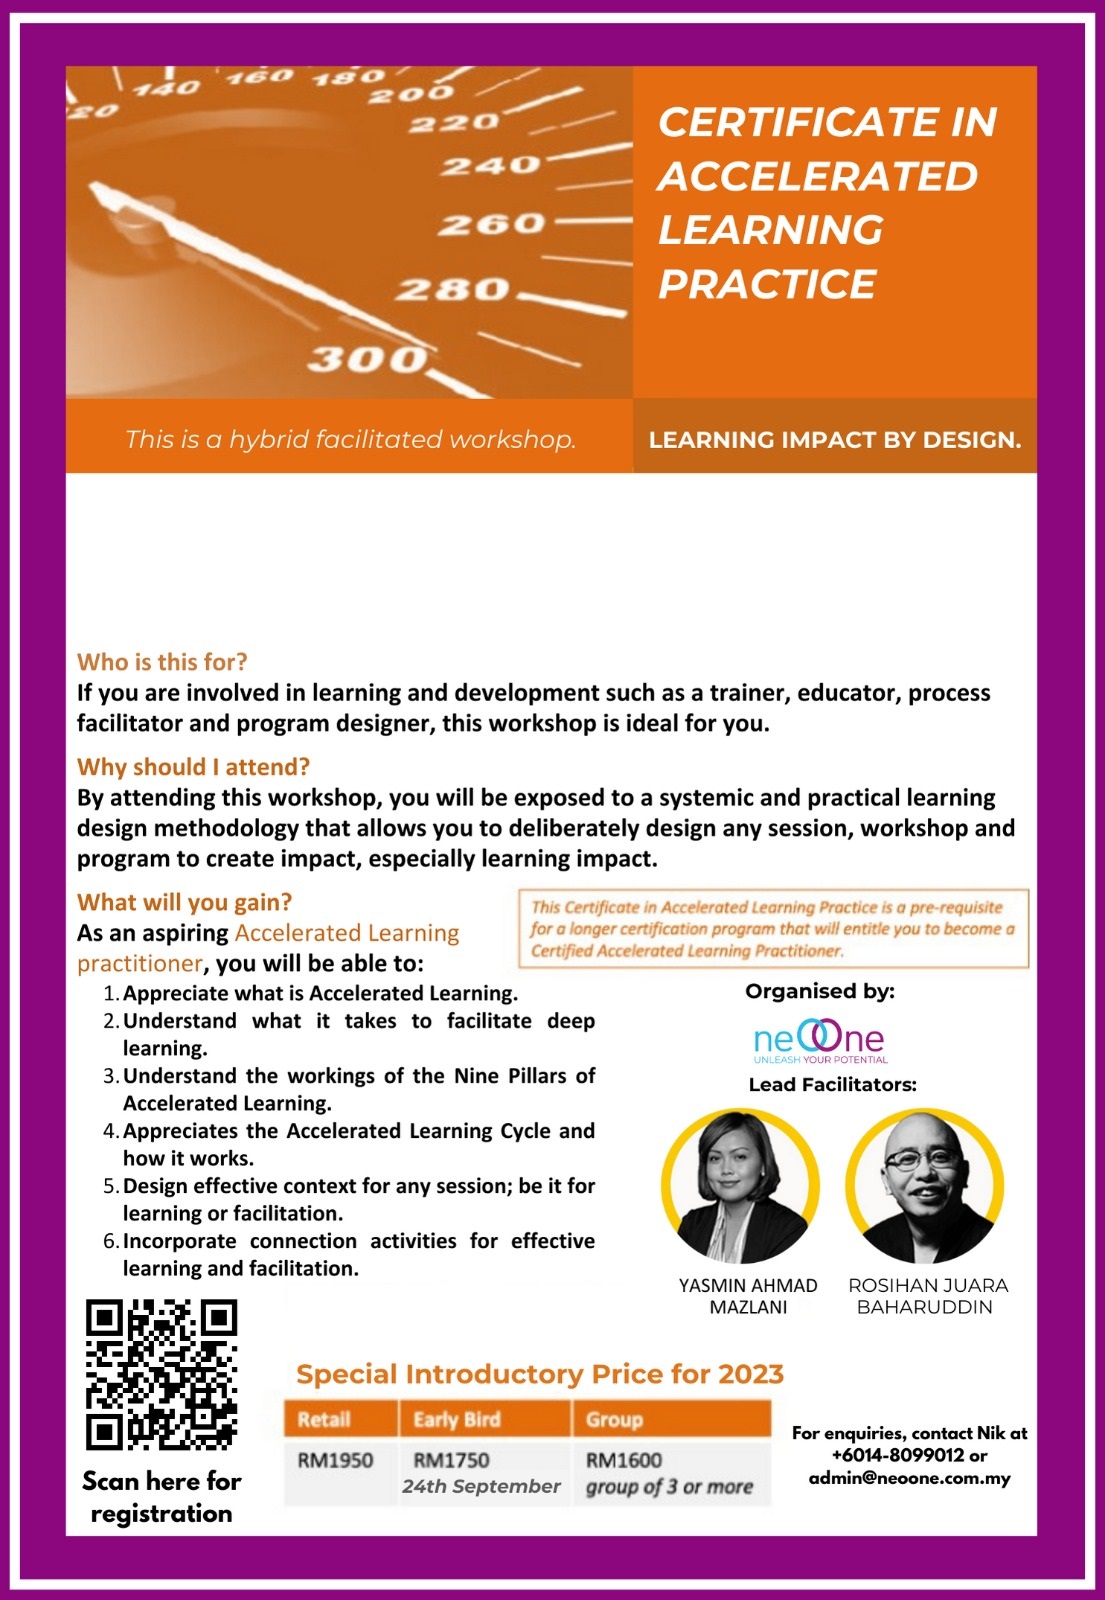 CERTIFICATE IN ACCELERATED LEARNING PRACTICE neOOne